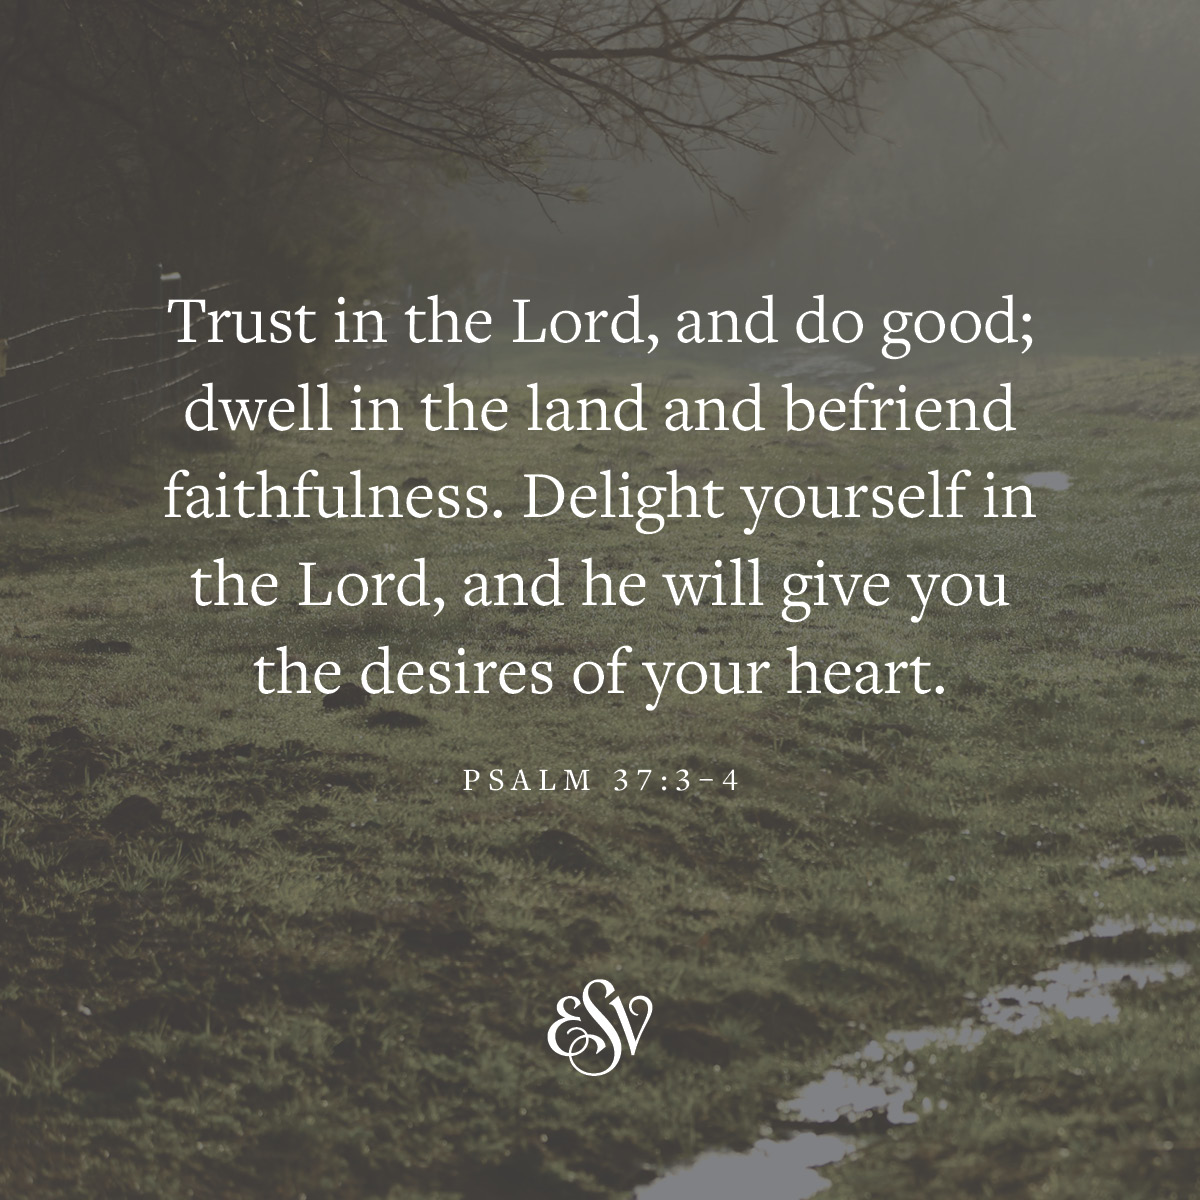 'dwell Trust in the Lord, and do good; in the the land and befriend faithfulness. Delight yourself in the Lord and he will give you the desires of your heart. PSALM 37:3-4'